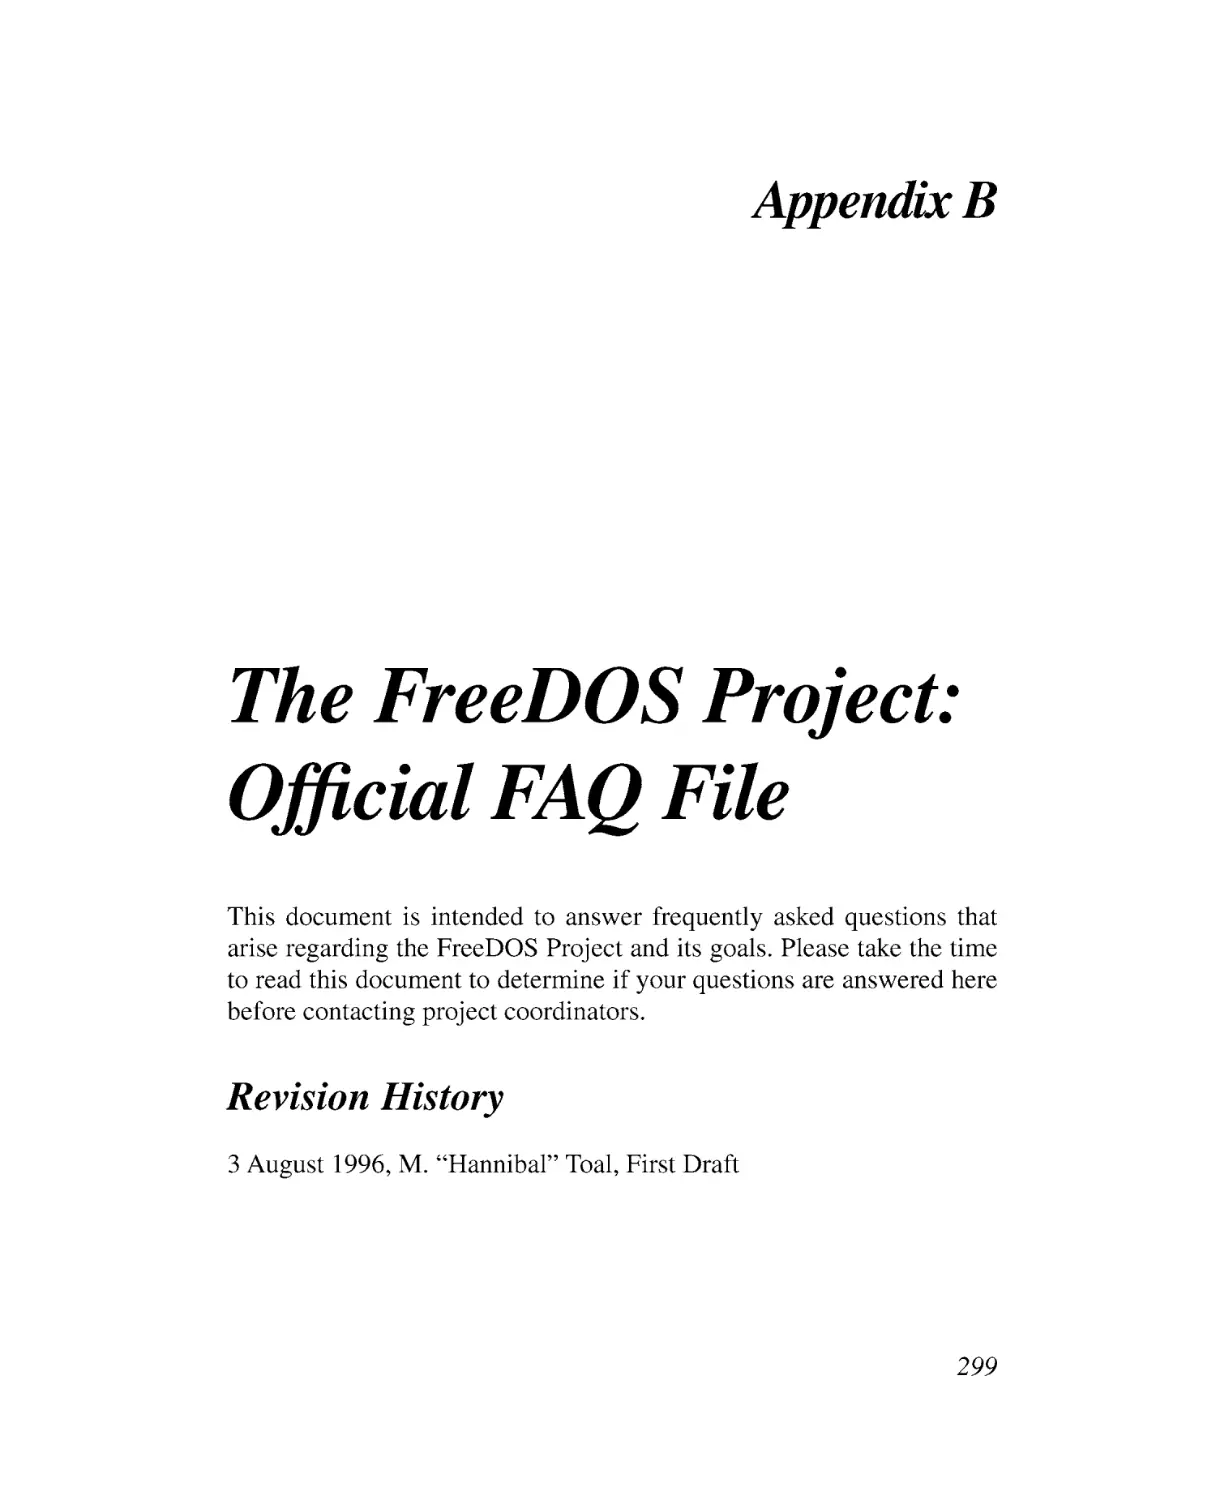 Appendix B The FreeDOS Project
Revision History